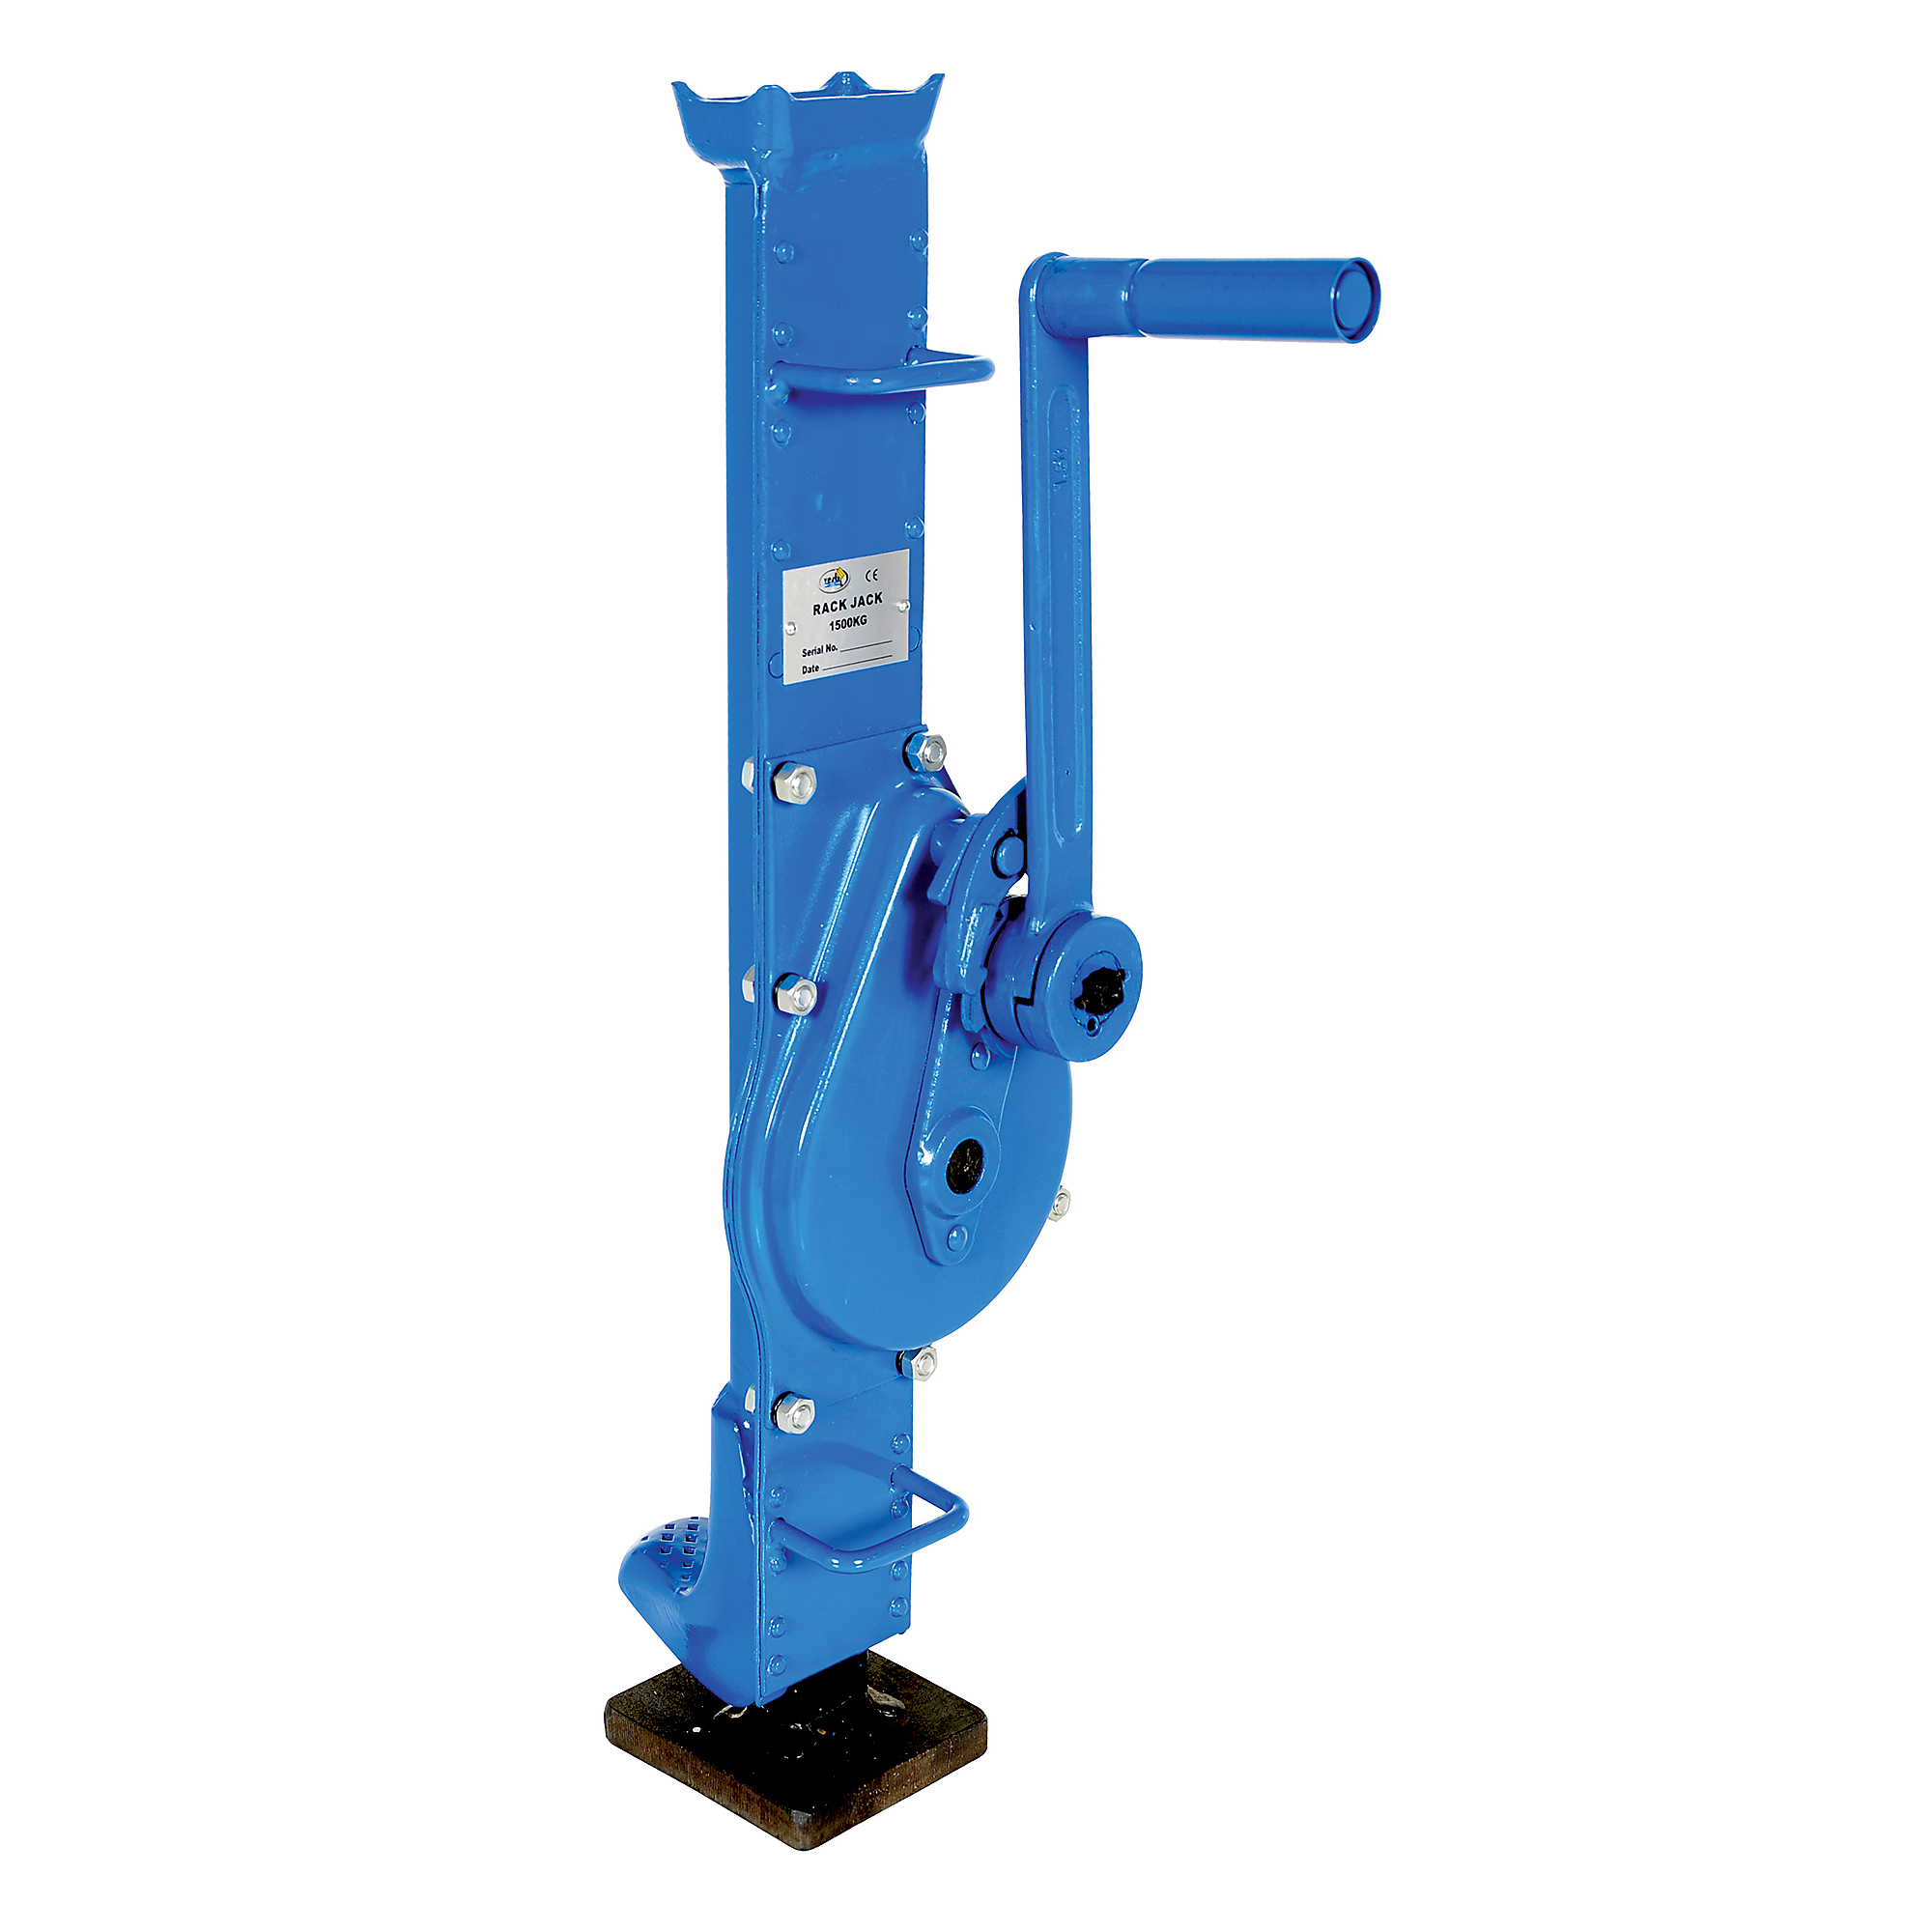 Vestil, Mechanical Machinery Jack 3k, Lift Capacity 1.5 Tons, MInch Lift Height 23.625 in, Max. Lift Height 35.438 in, Model MMJ-3